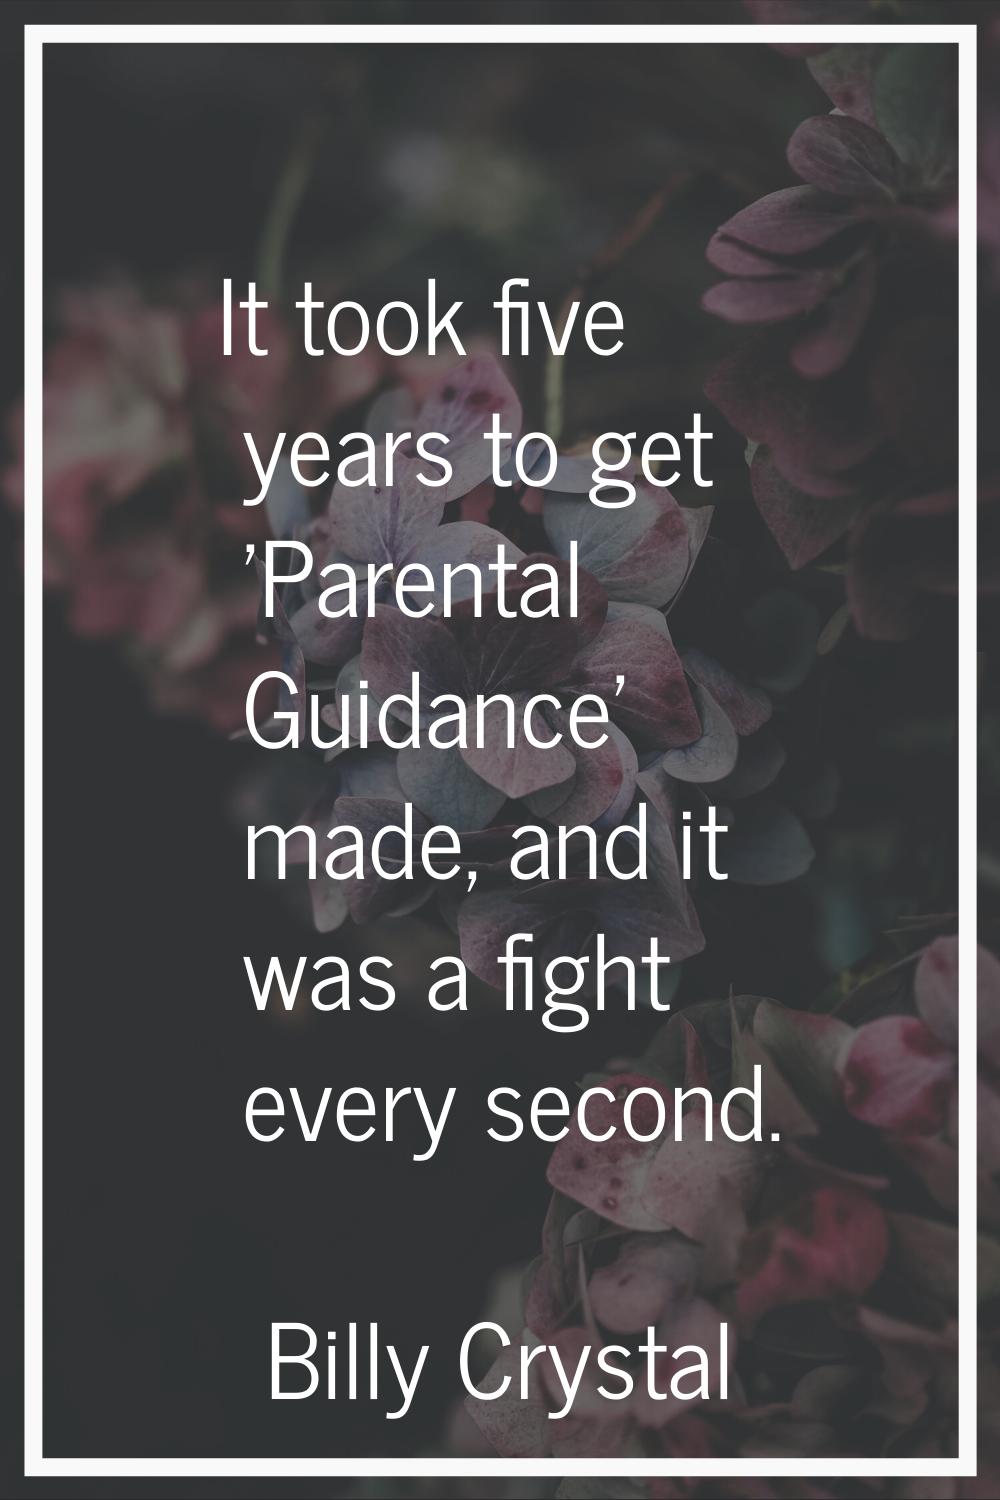 It took five years to get 'Parental Guidance' made, and it was a fight every second.